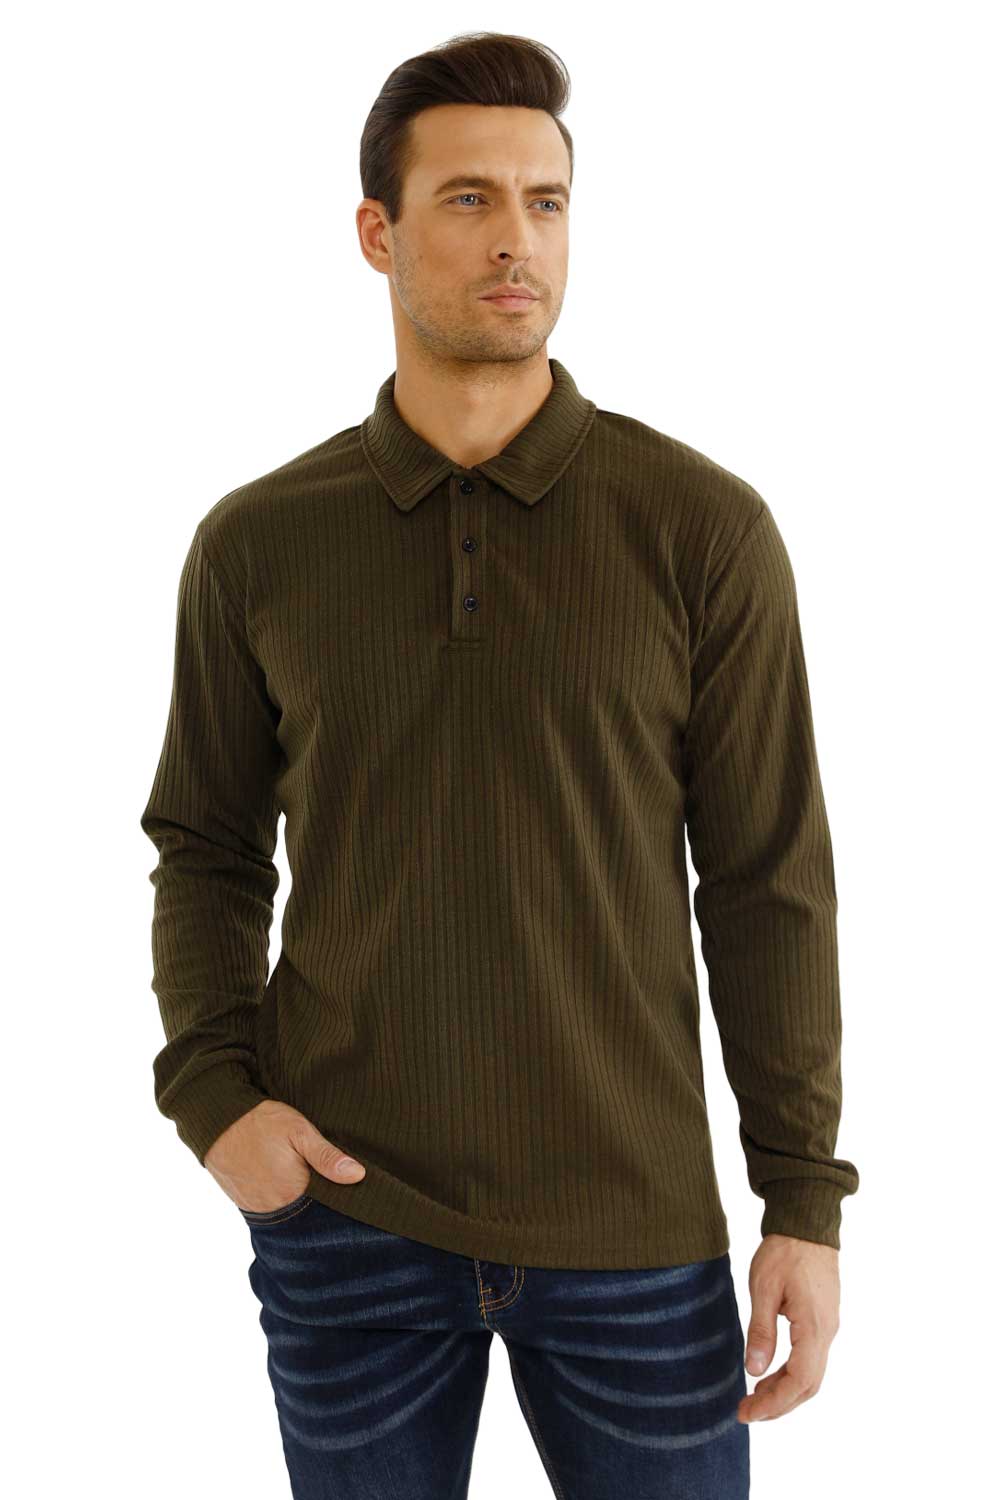 Gingtto's Classic Comfortable Polo Shirts for Men: Your Style, Your Way